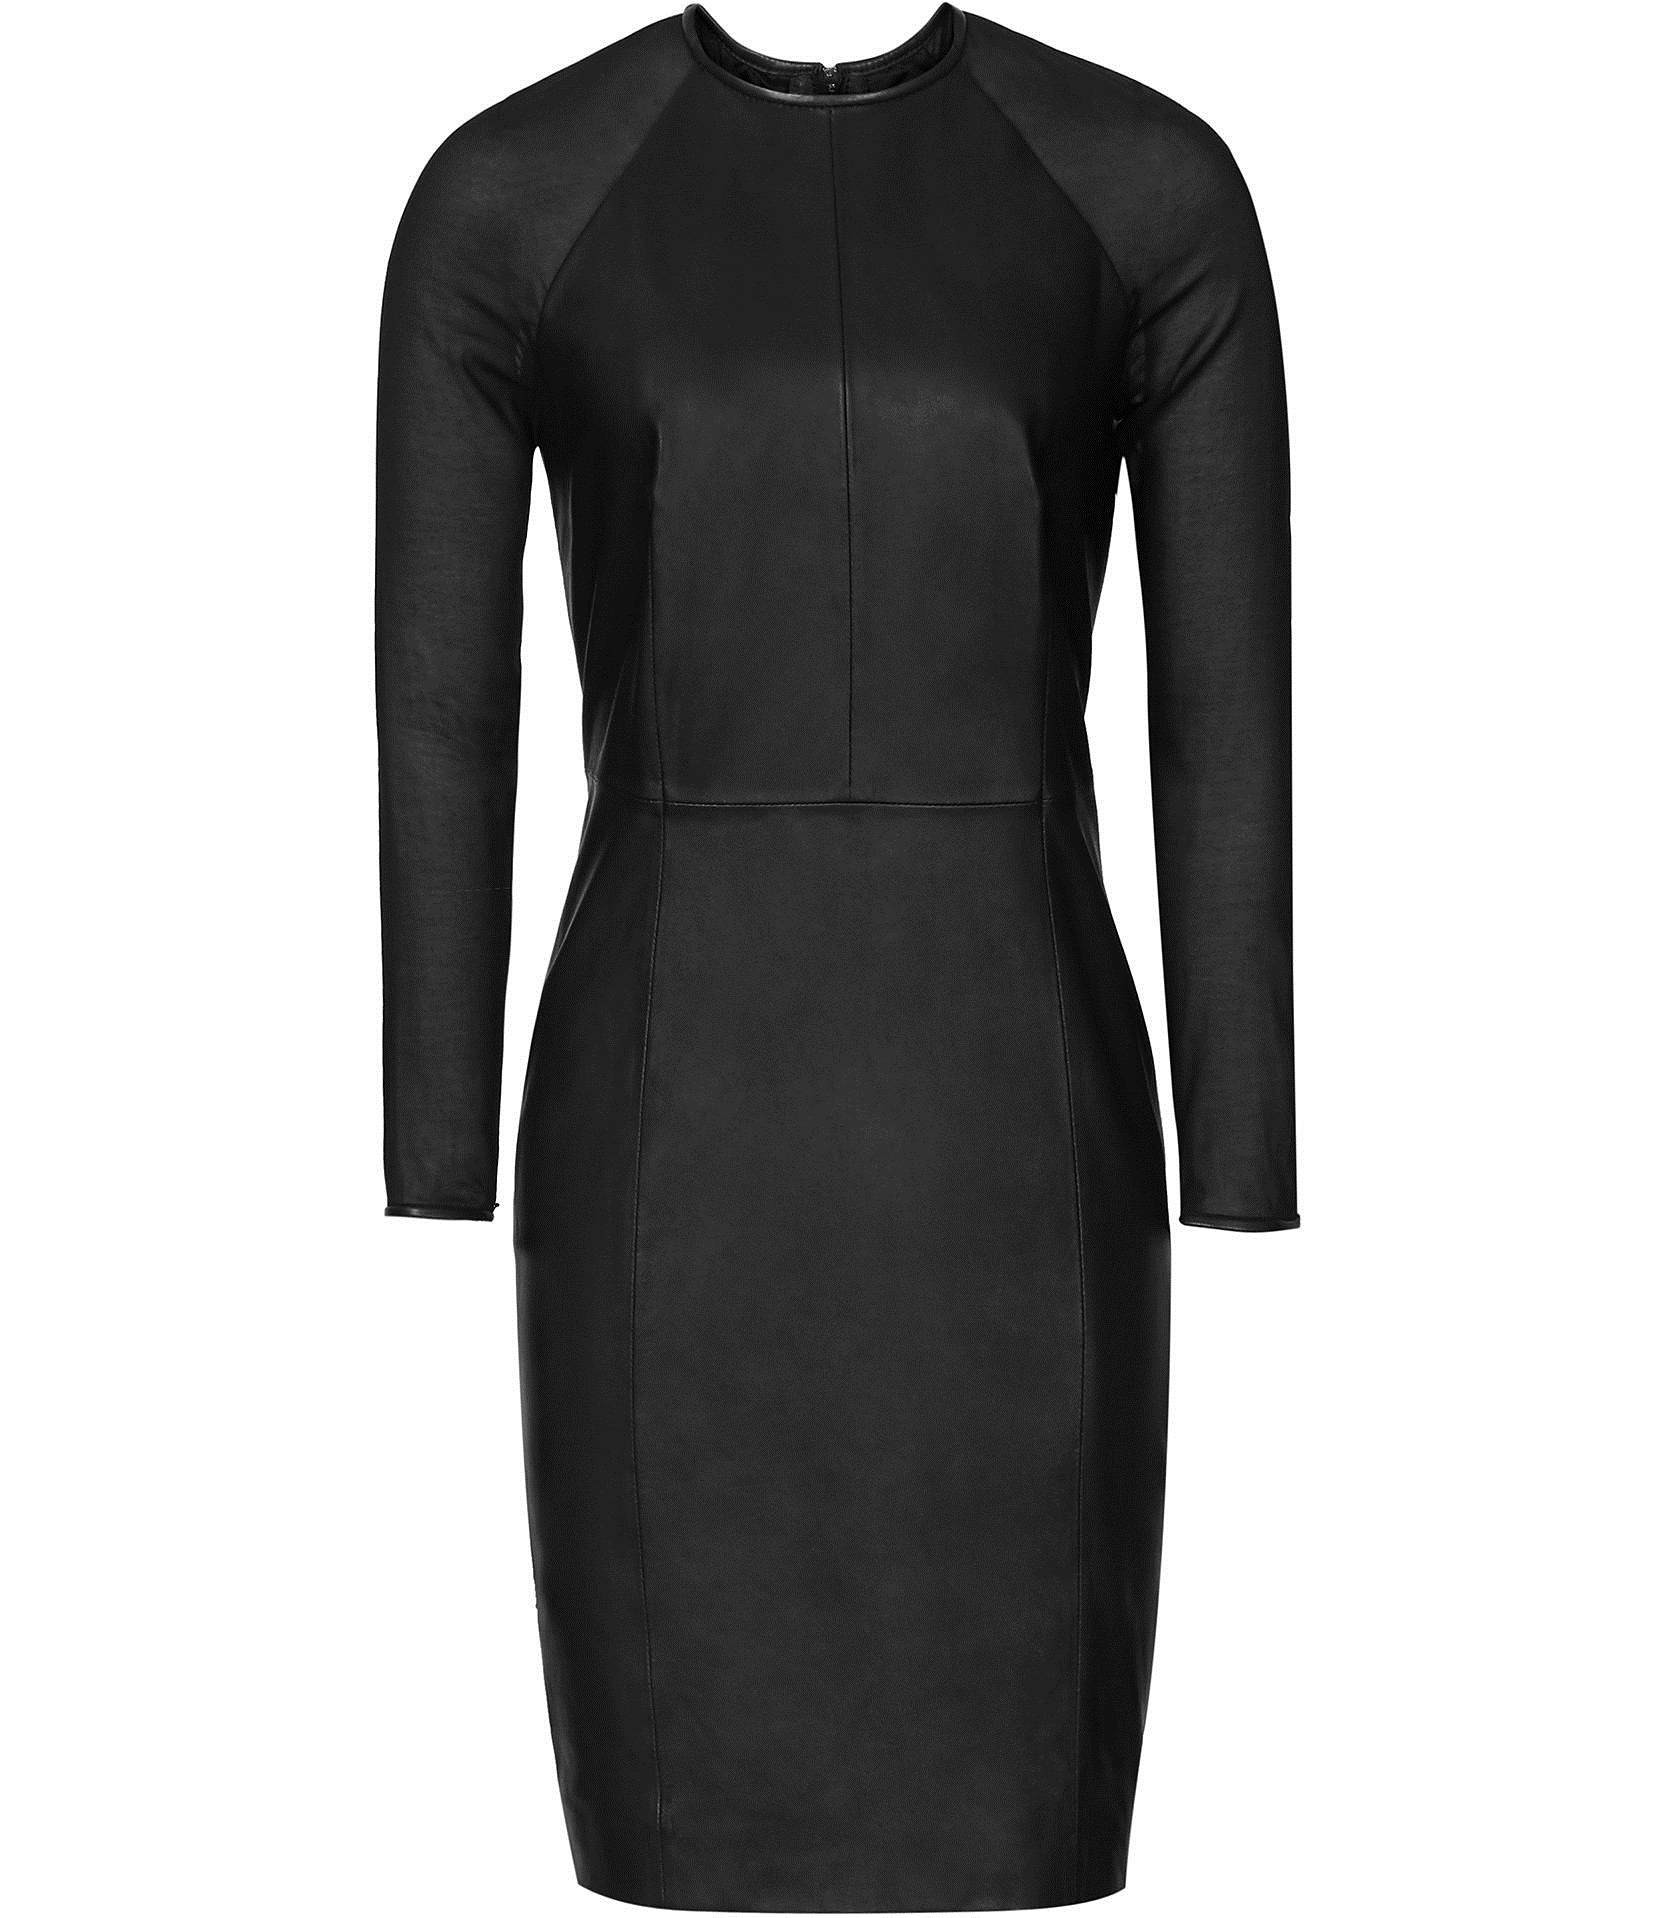 Reiss Elodie Black Leather And Chiffon Dress 29621820